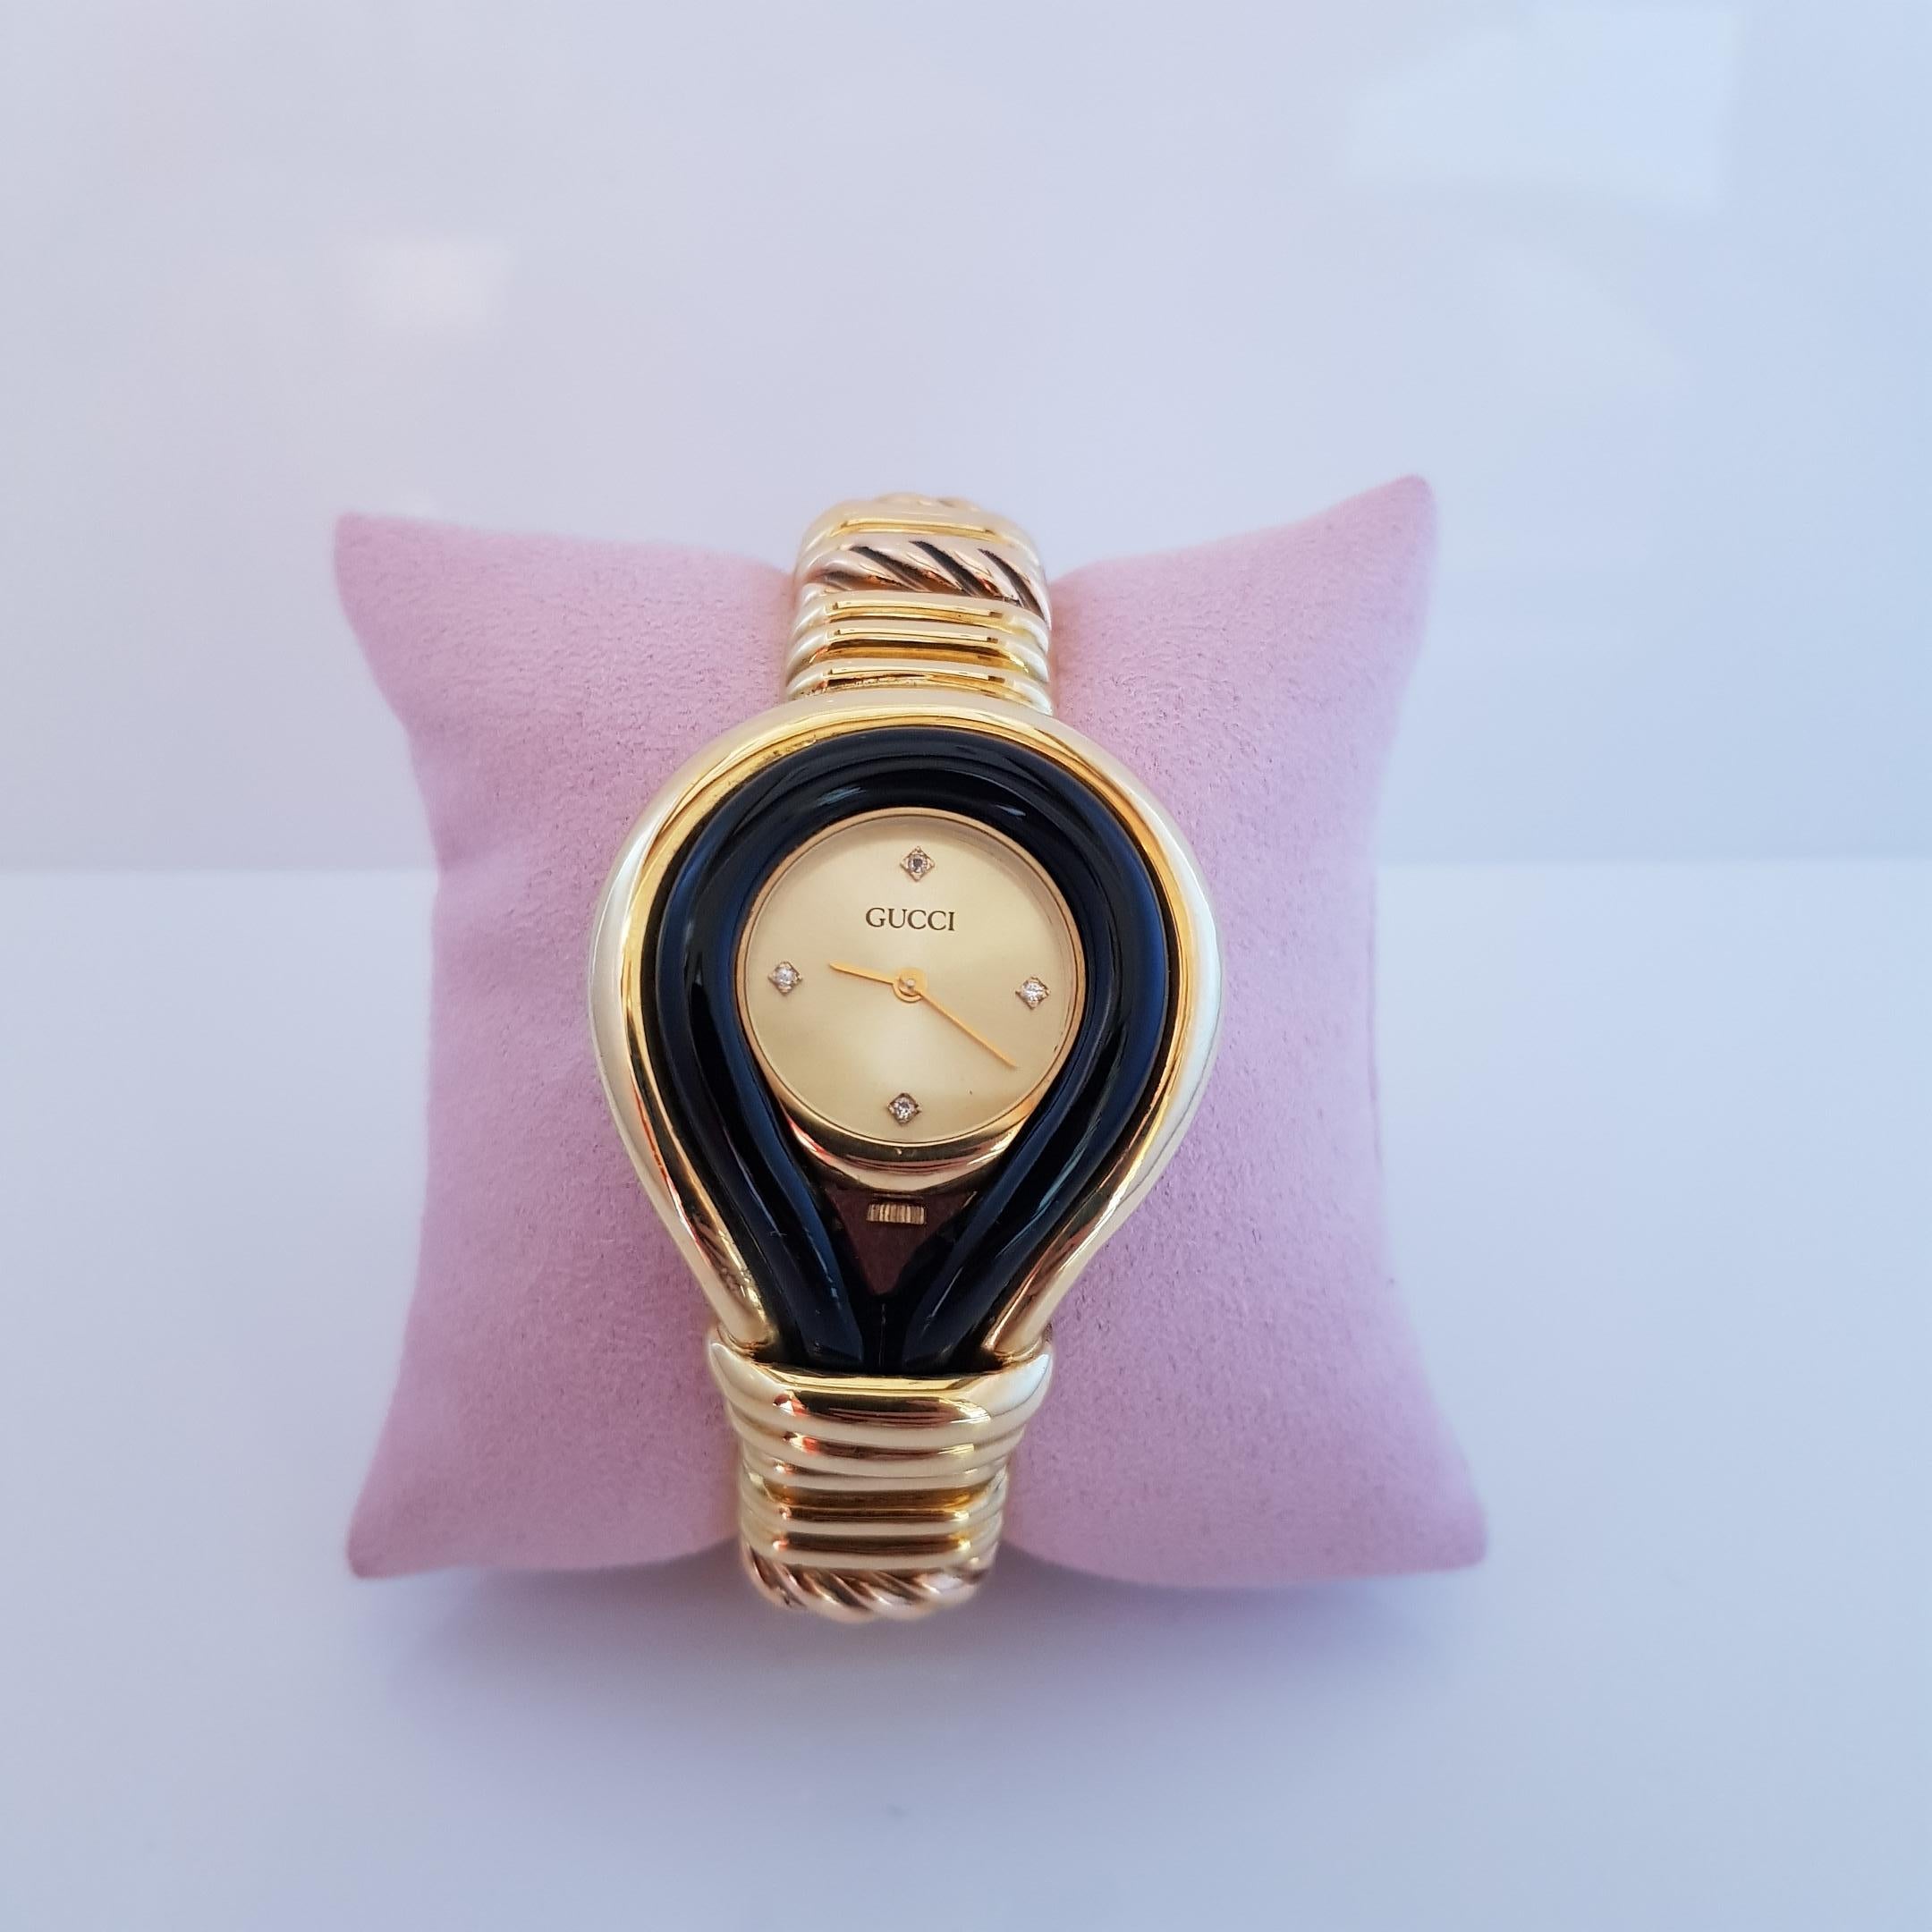 Gucci Quartz Watch. The case is set in 18KT Yellow with onyx bezel, the bracelet is made in 18kt Yellow and Rose 
 gold and it has buckle closure. The dial satiné soleil it has carats 0,03 diamond indexes. Cca 1970 it has Paolo Gucci Original Design